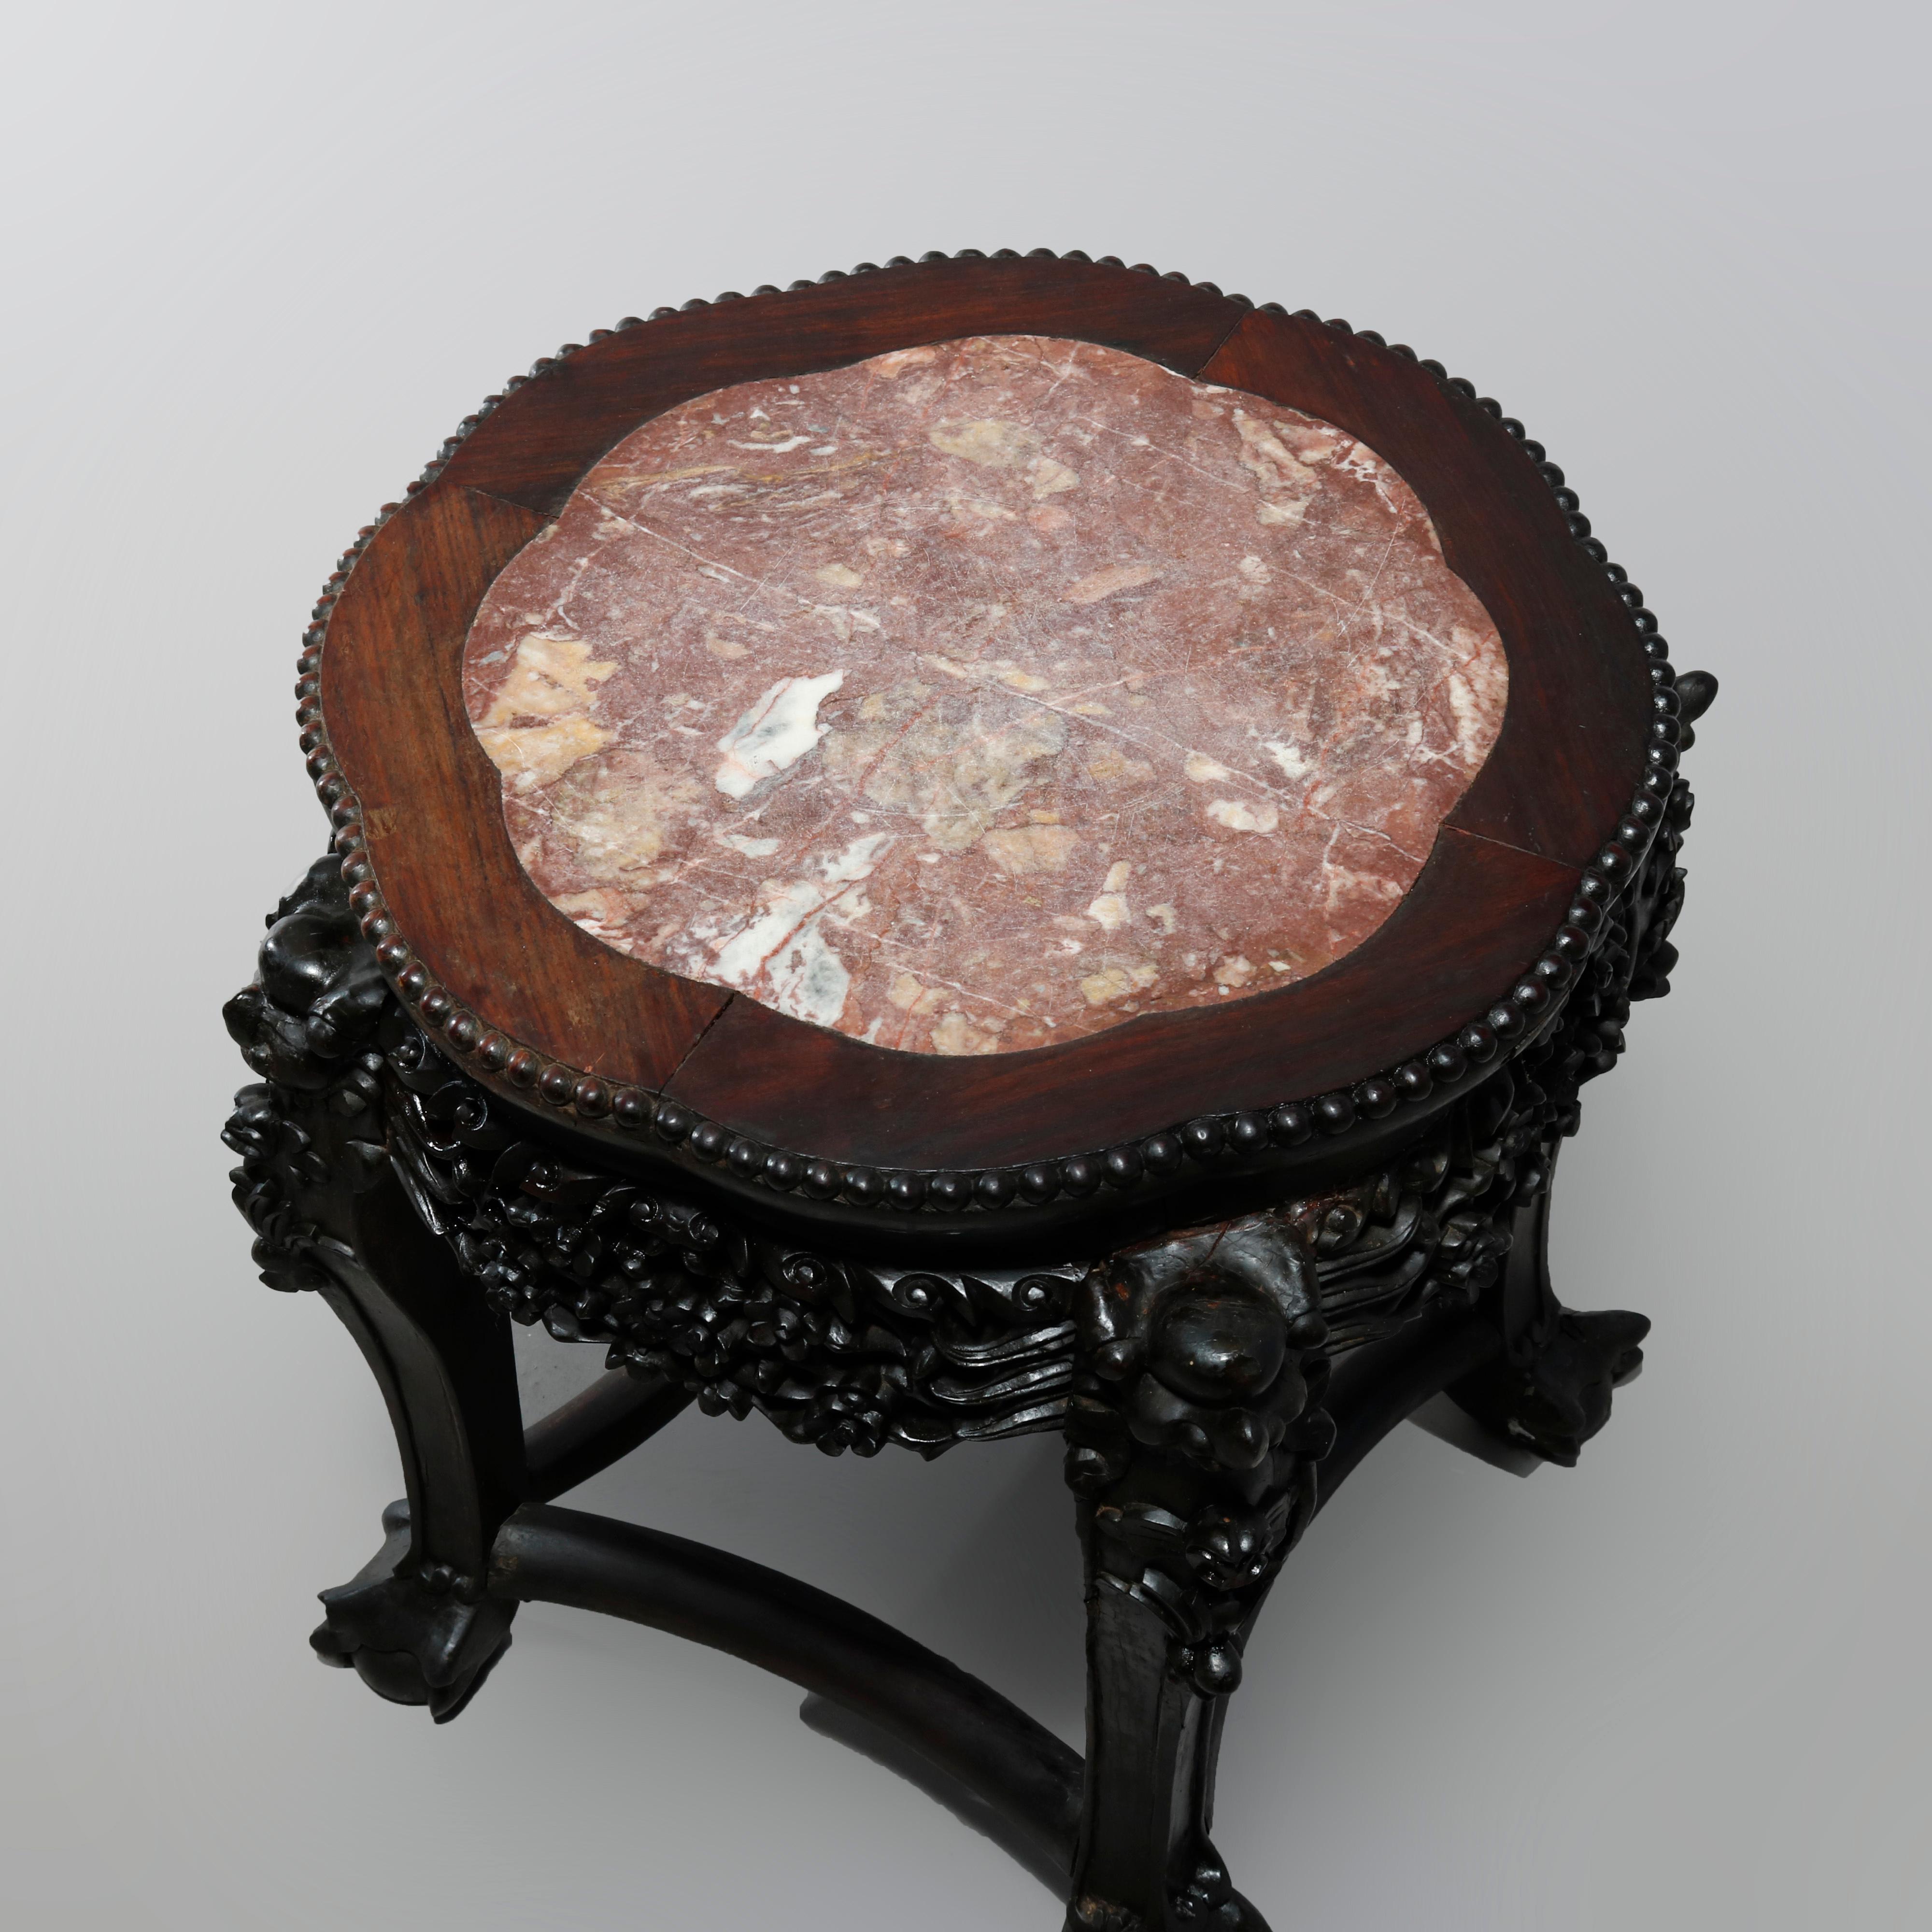 An antique Chinese plant stand offers shaped top with inset marble top surmounting hardwood frame with foliate deeply carved skirt raised on legs with stylized claw and ball feet, c1920.

Measures: 18.25